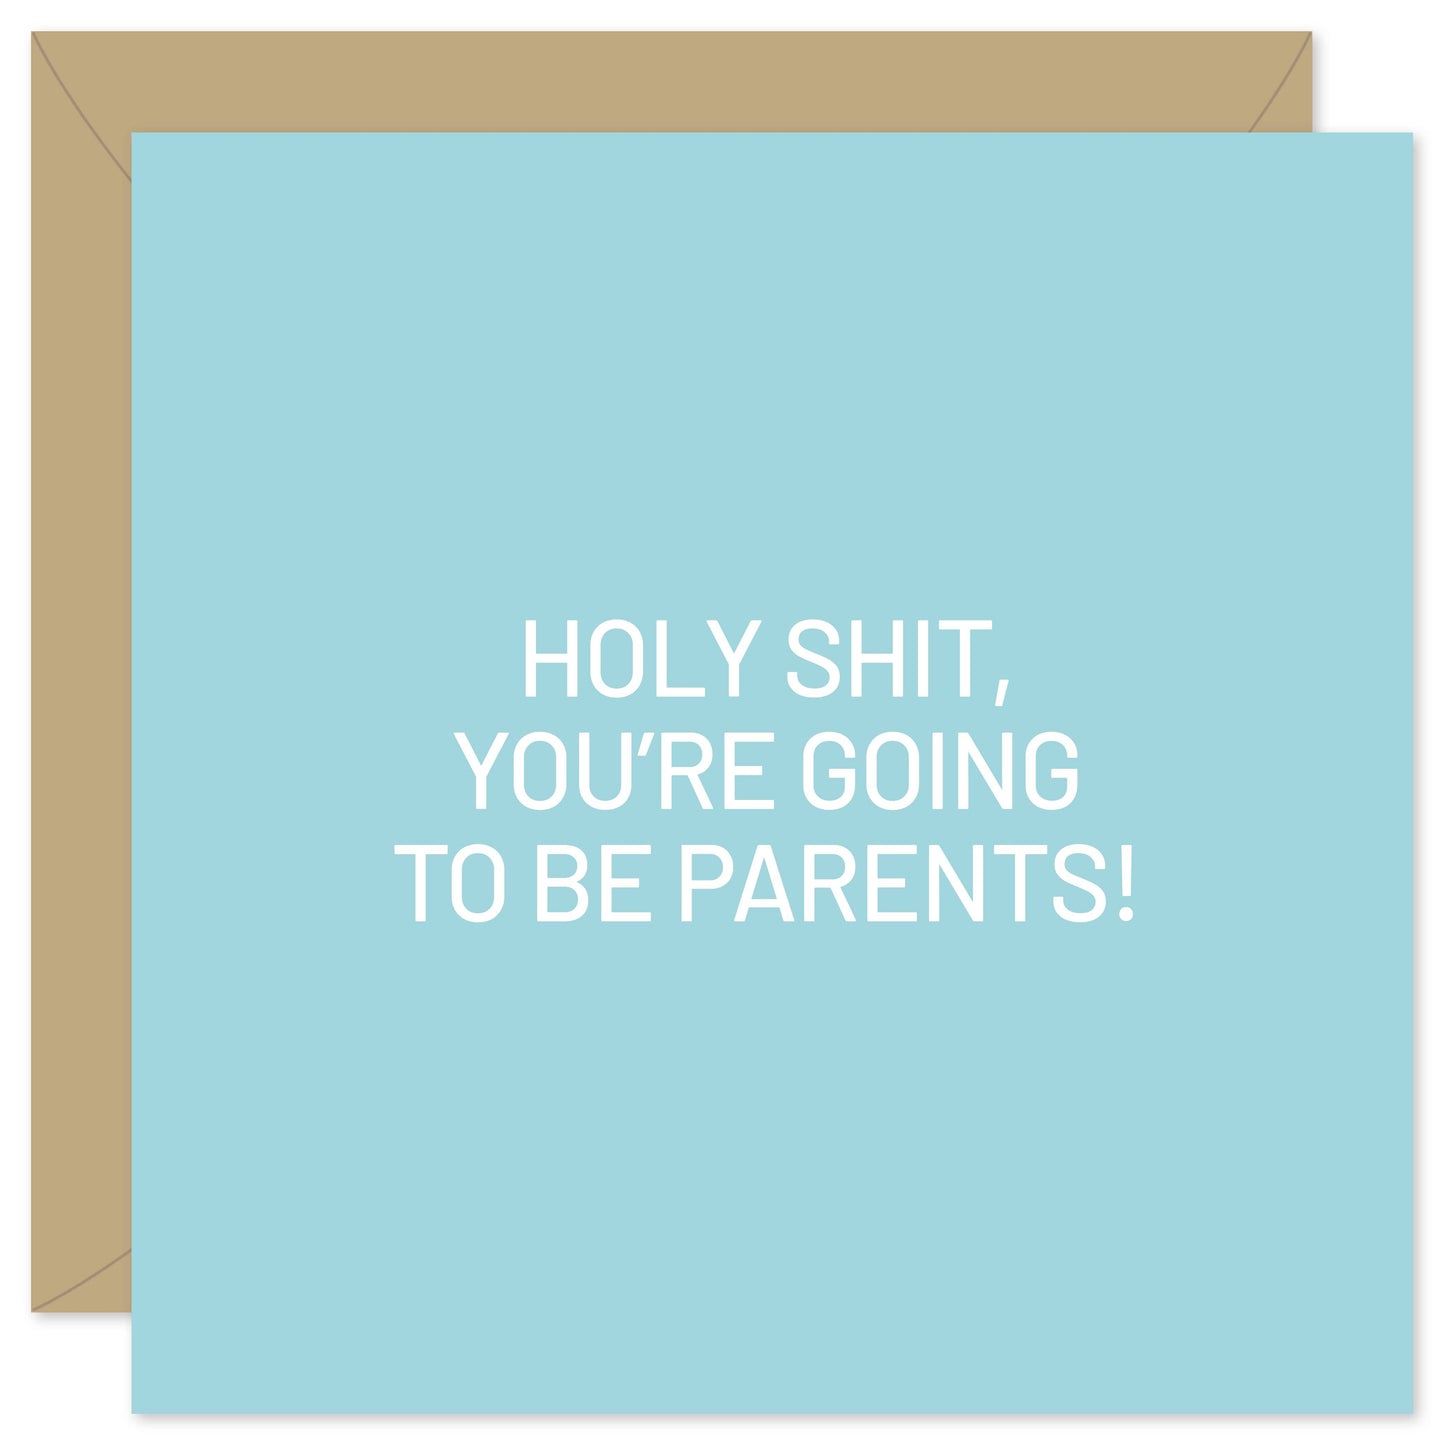 You're going to be parents card